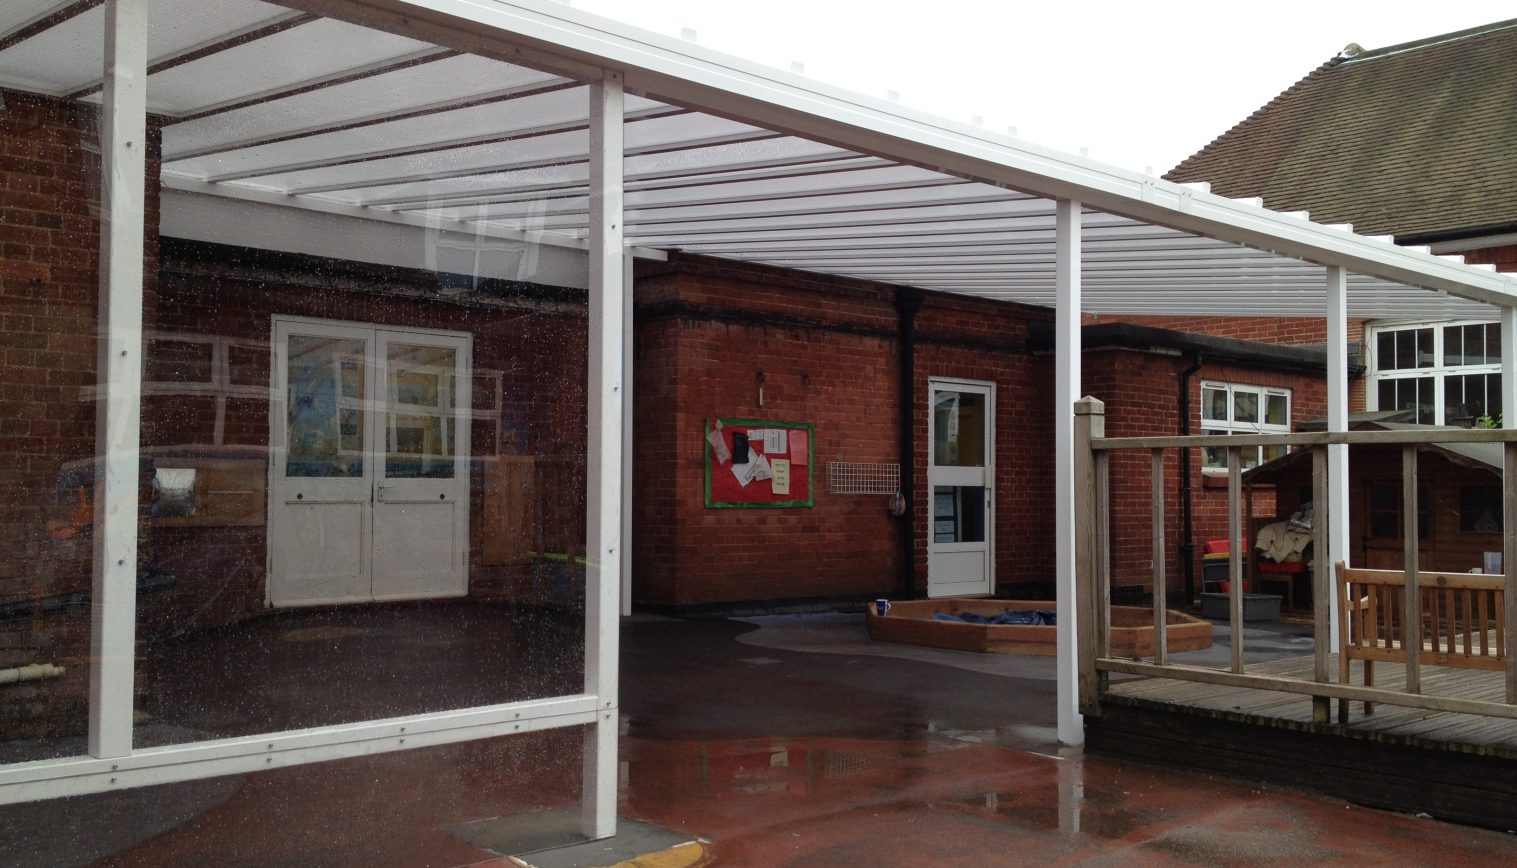 Stoughton Infant School – 2nd Wall Mounted Canopy